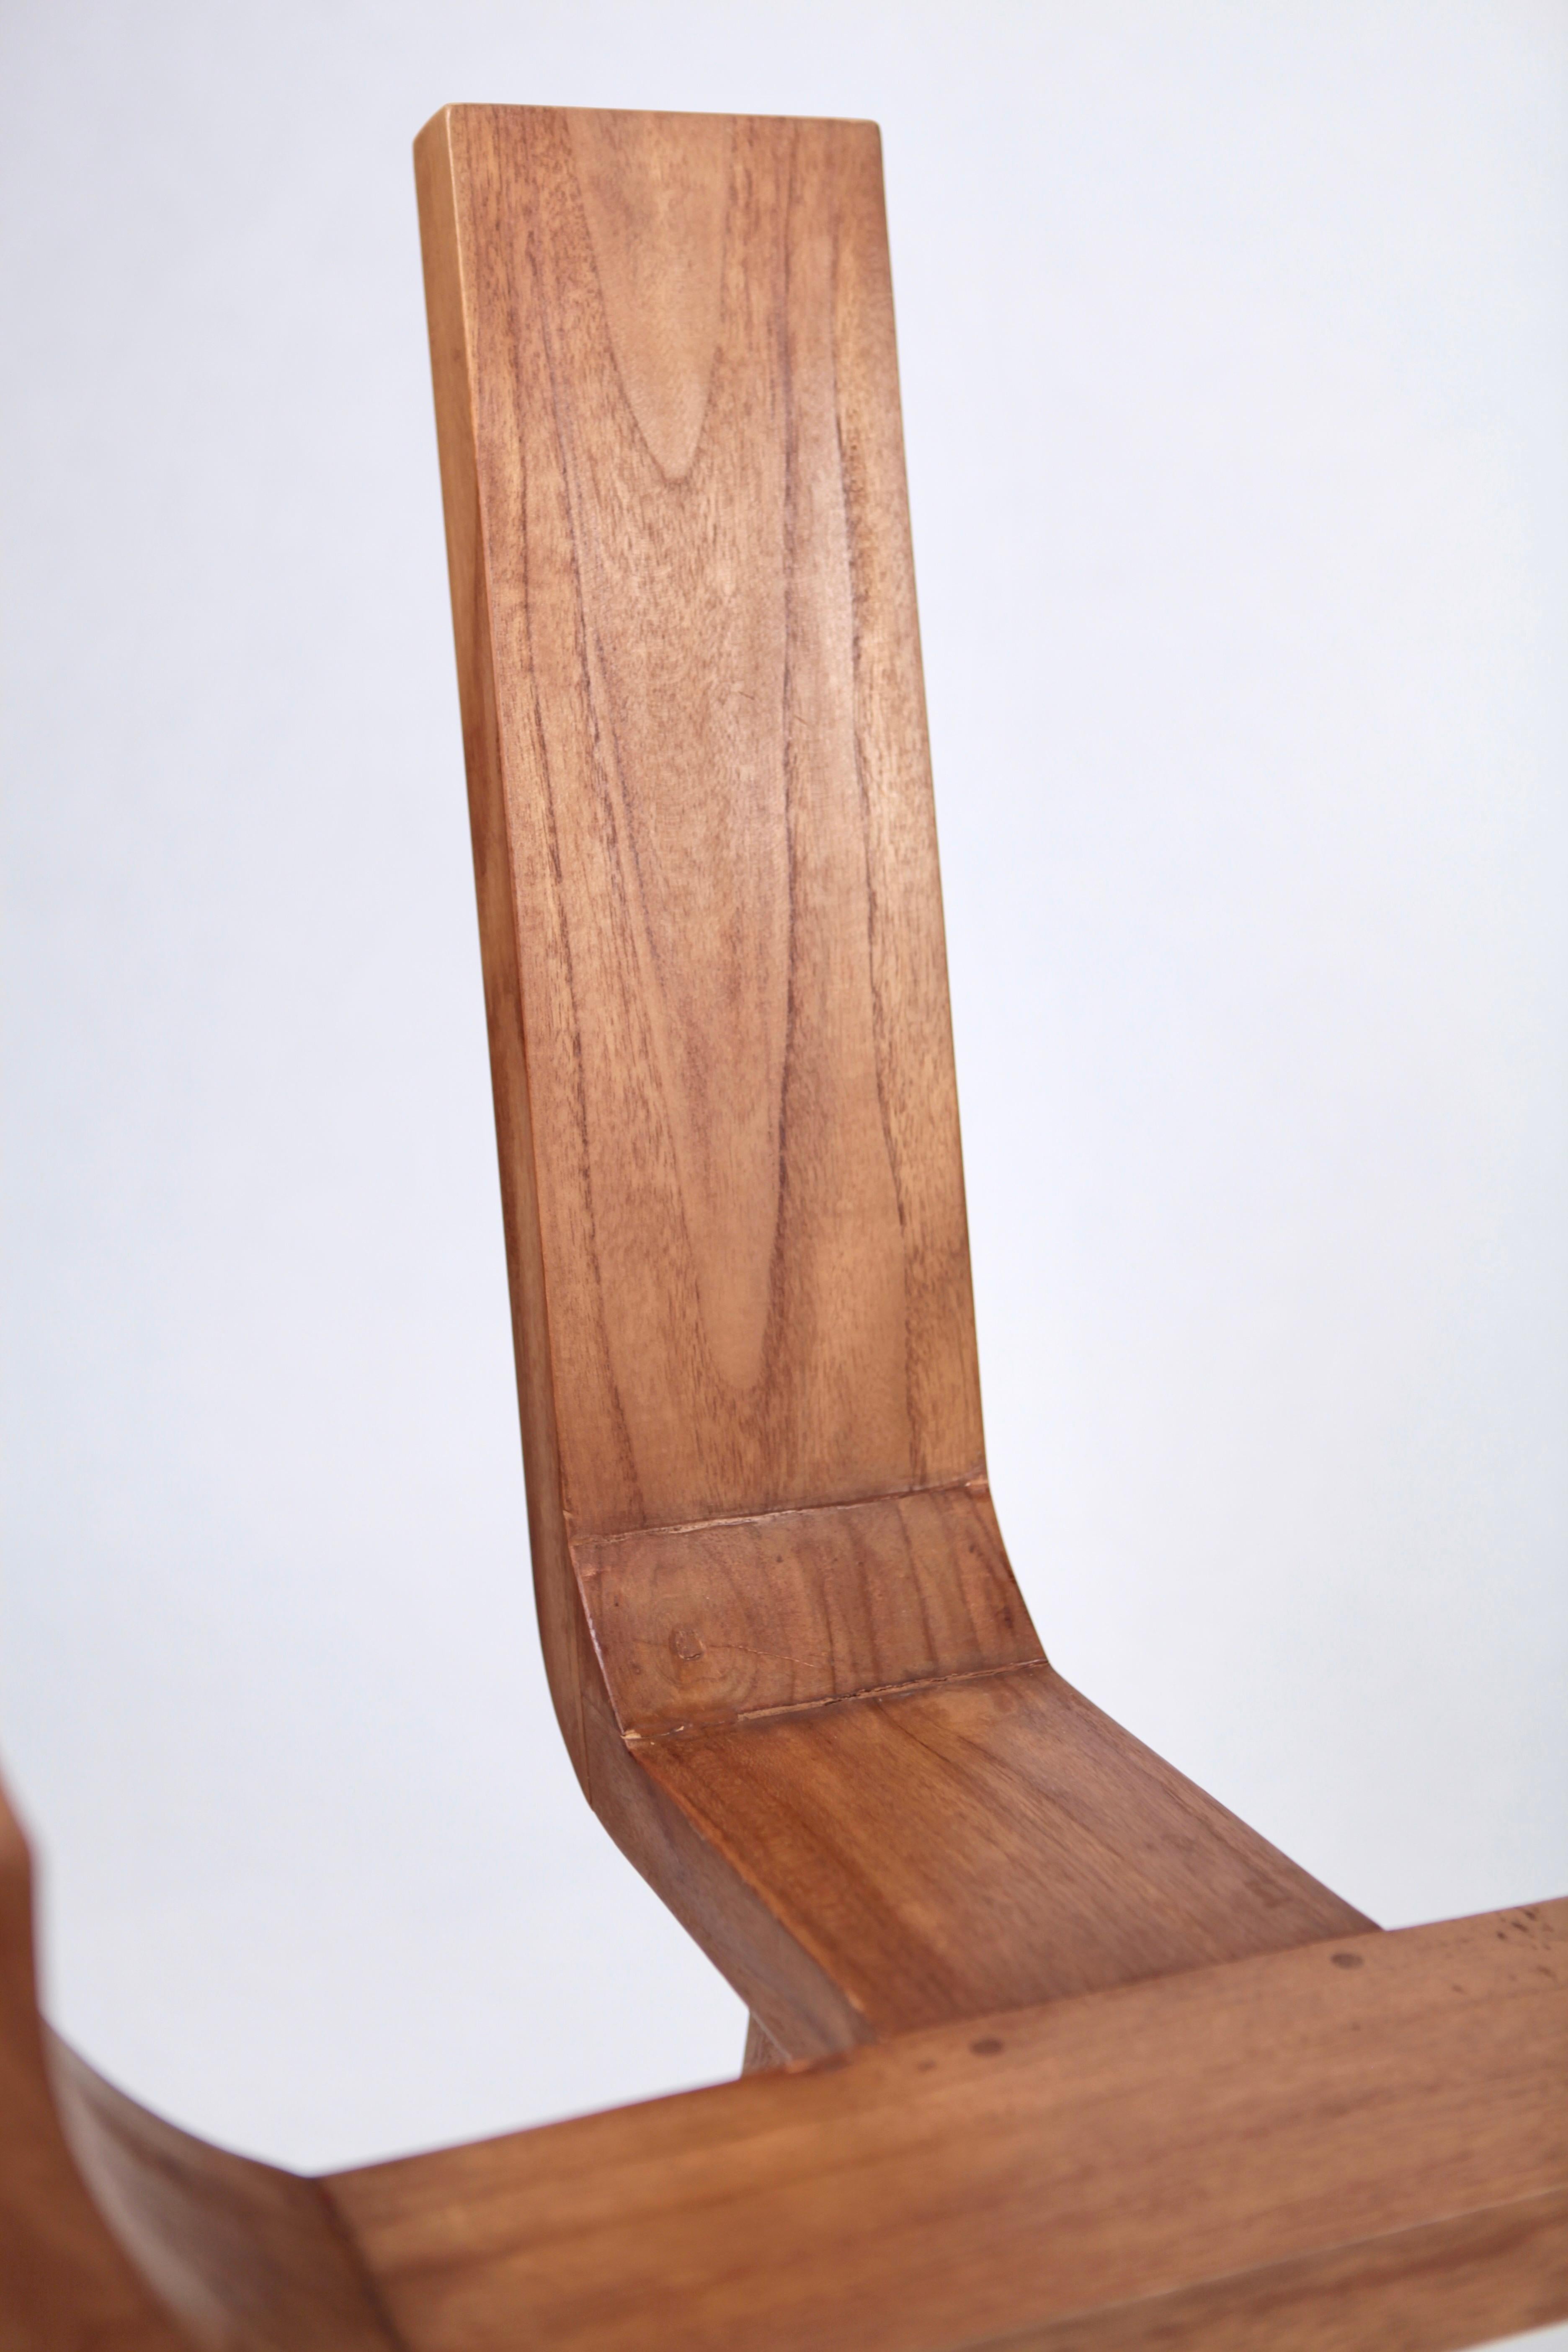 Sculptural Danish Easy Chairs, Solid Teak, 1960s For Sale 11